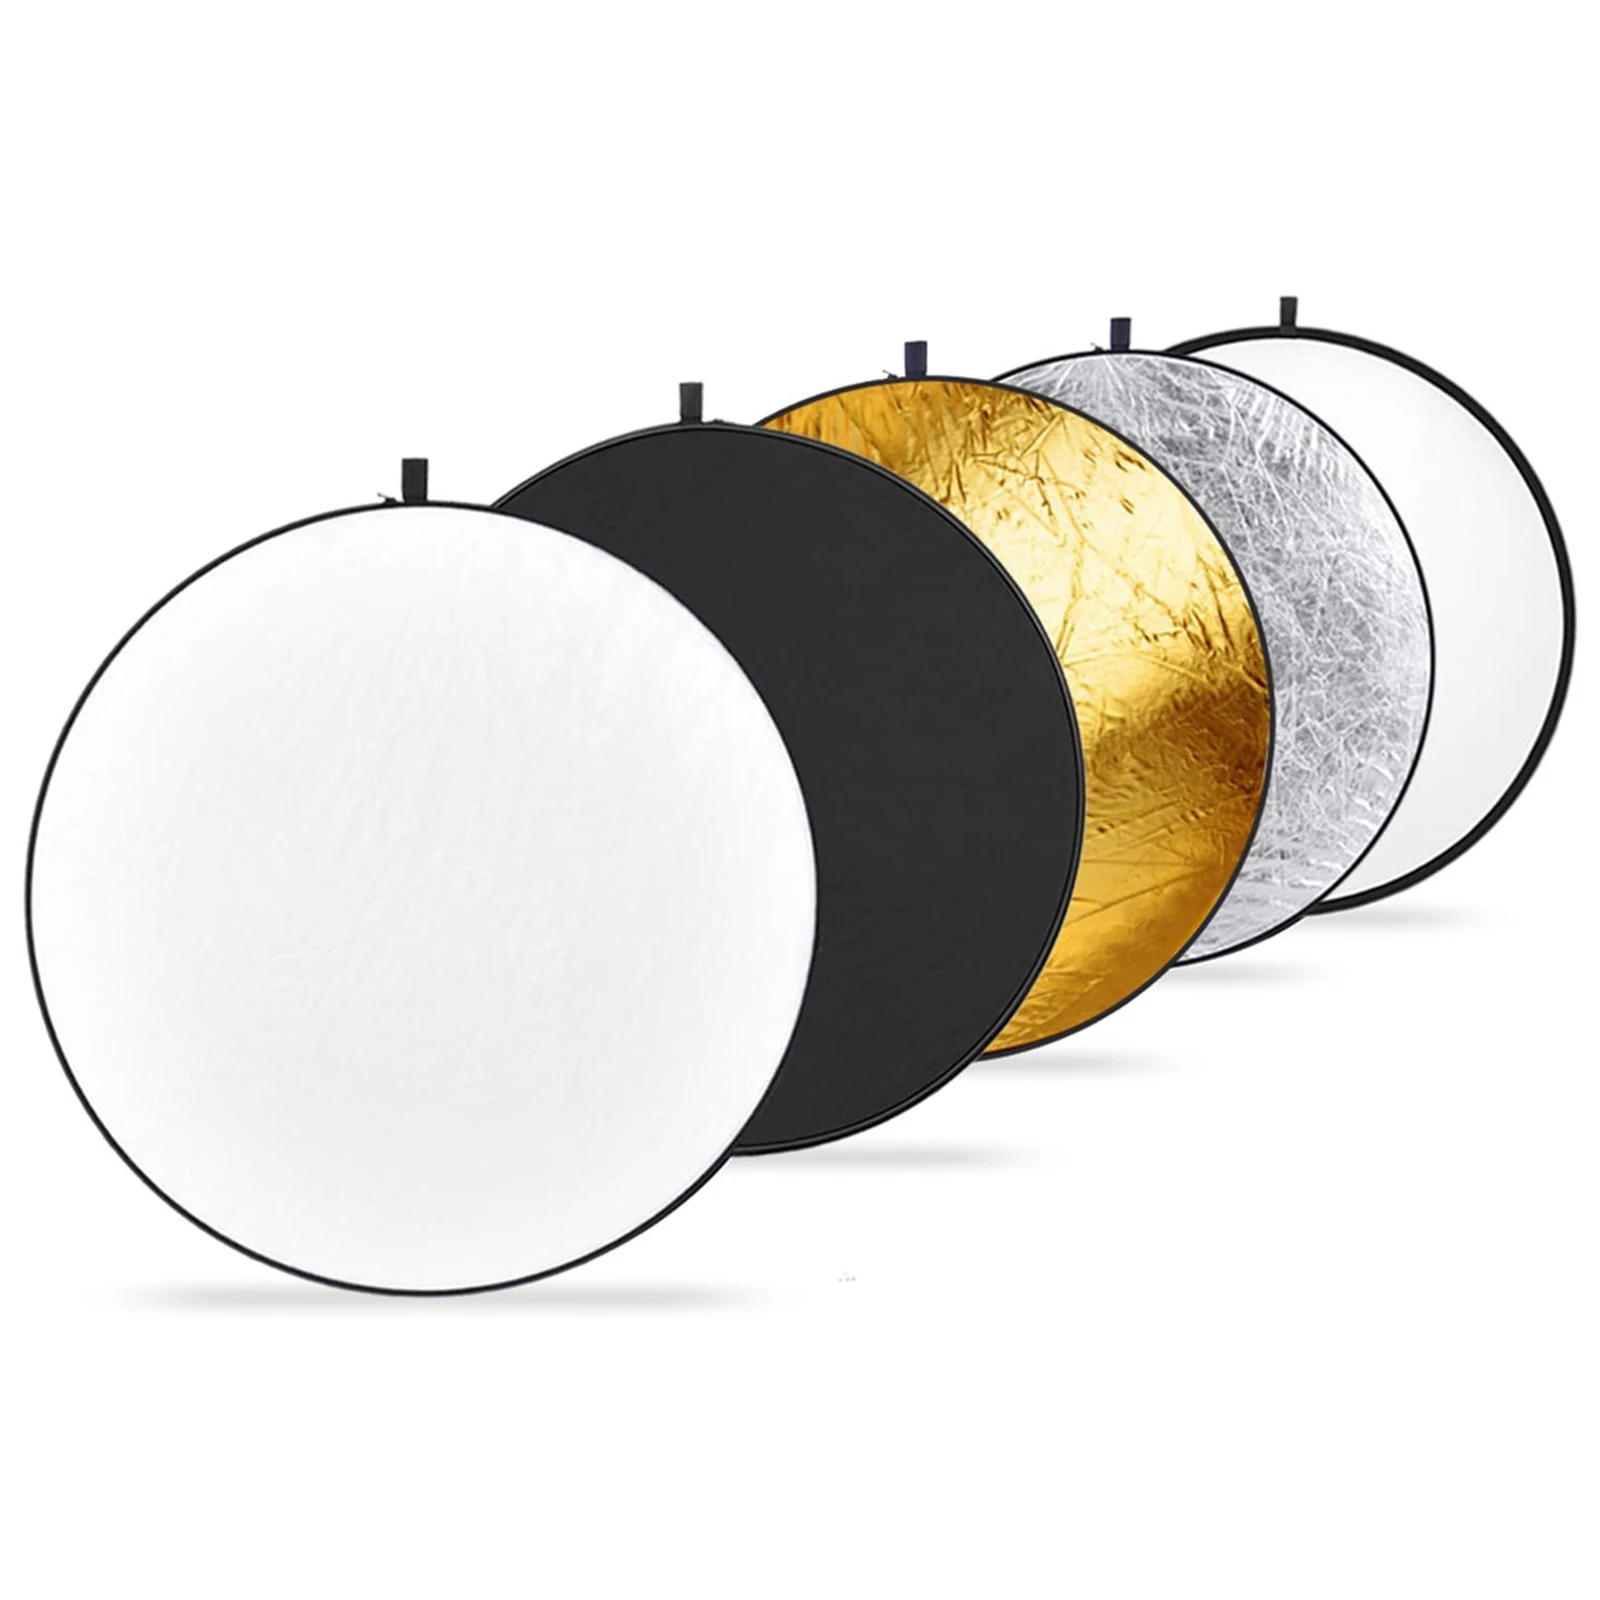 

Neewer HOT 60cm 22" 5 in 1 Portable Collapsible Light Round Multi Photography Reflector for Studio with Zipped Carrying Bag